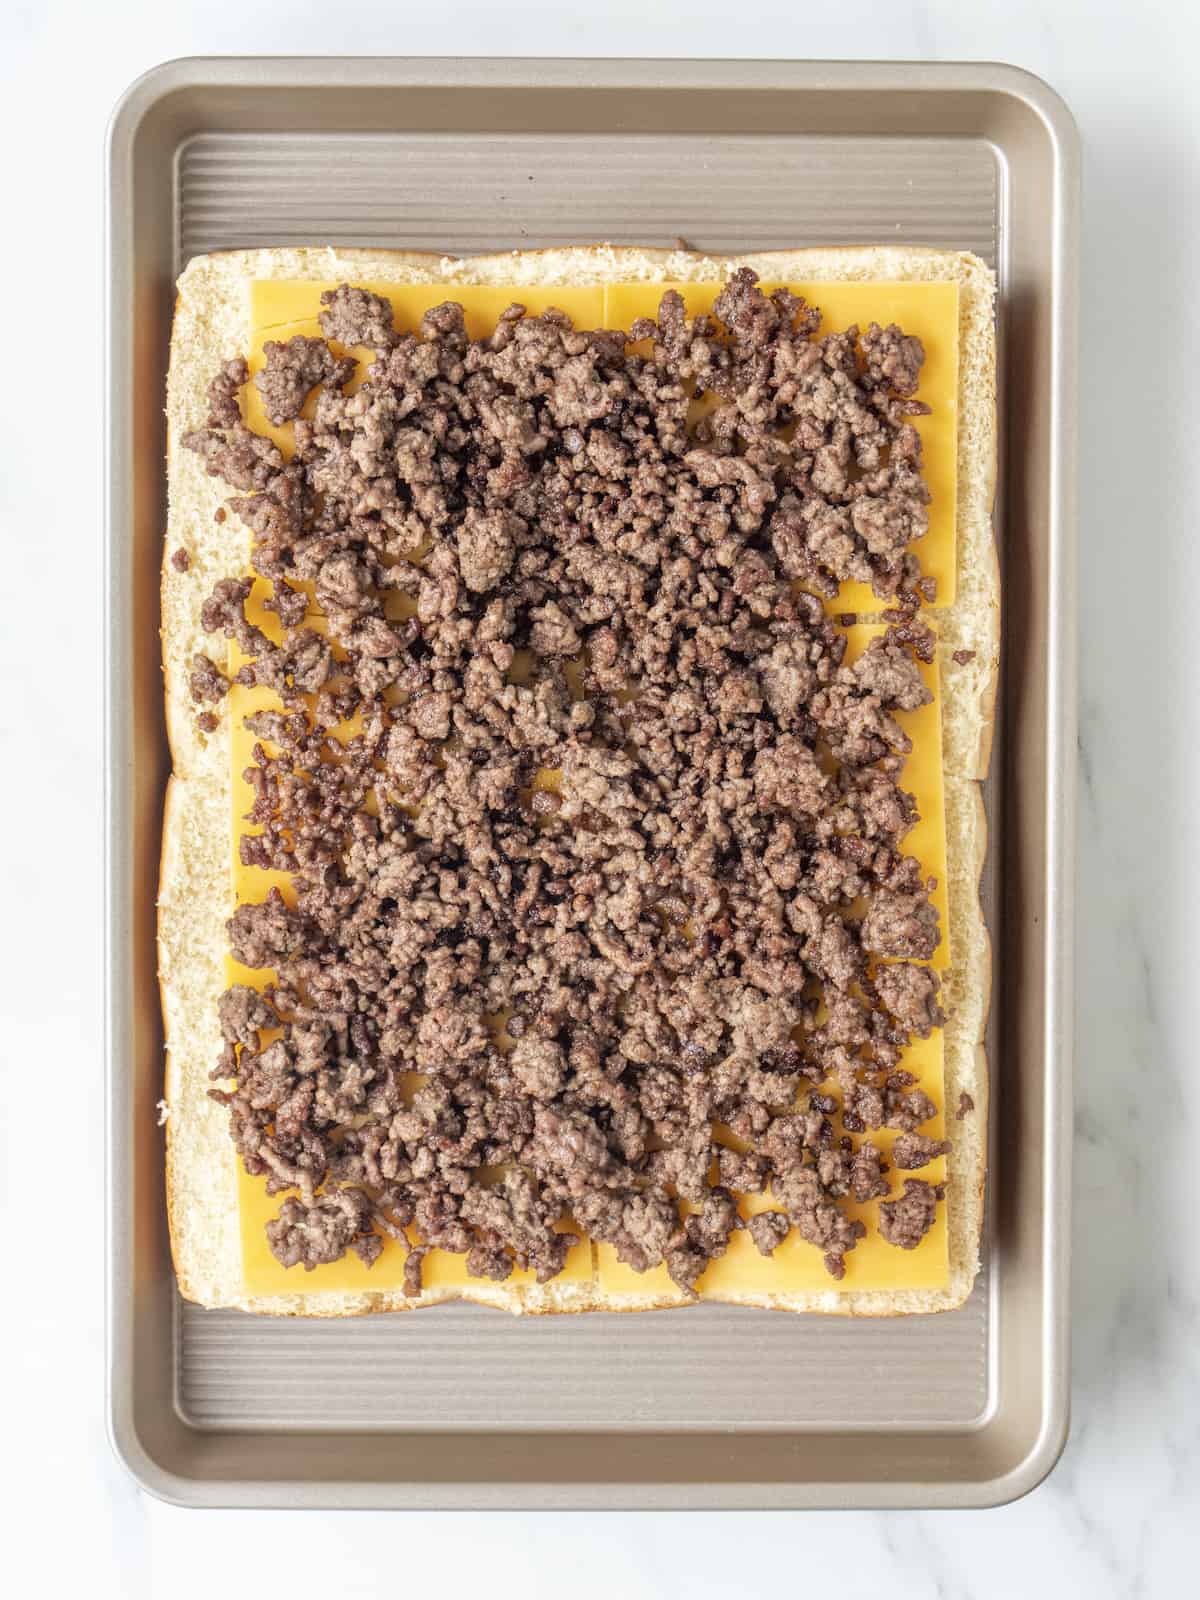 A baking sheet with a 3x4 grid of bottom half of slider buns topped with slices of cheddar cheese and ground beef.